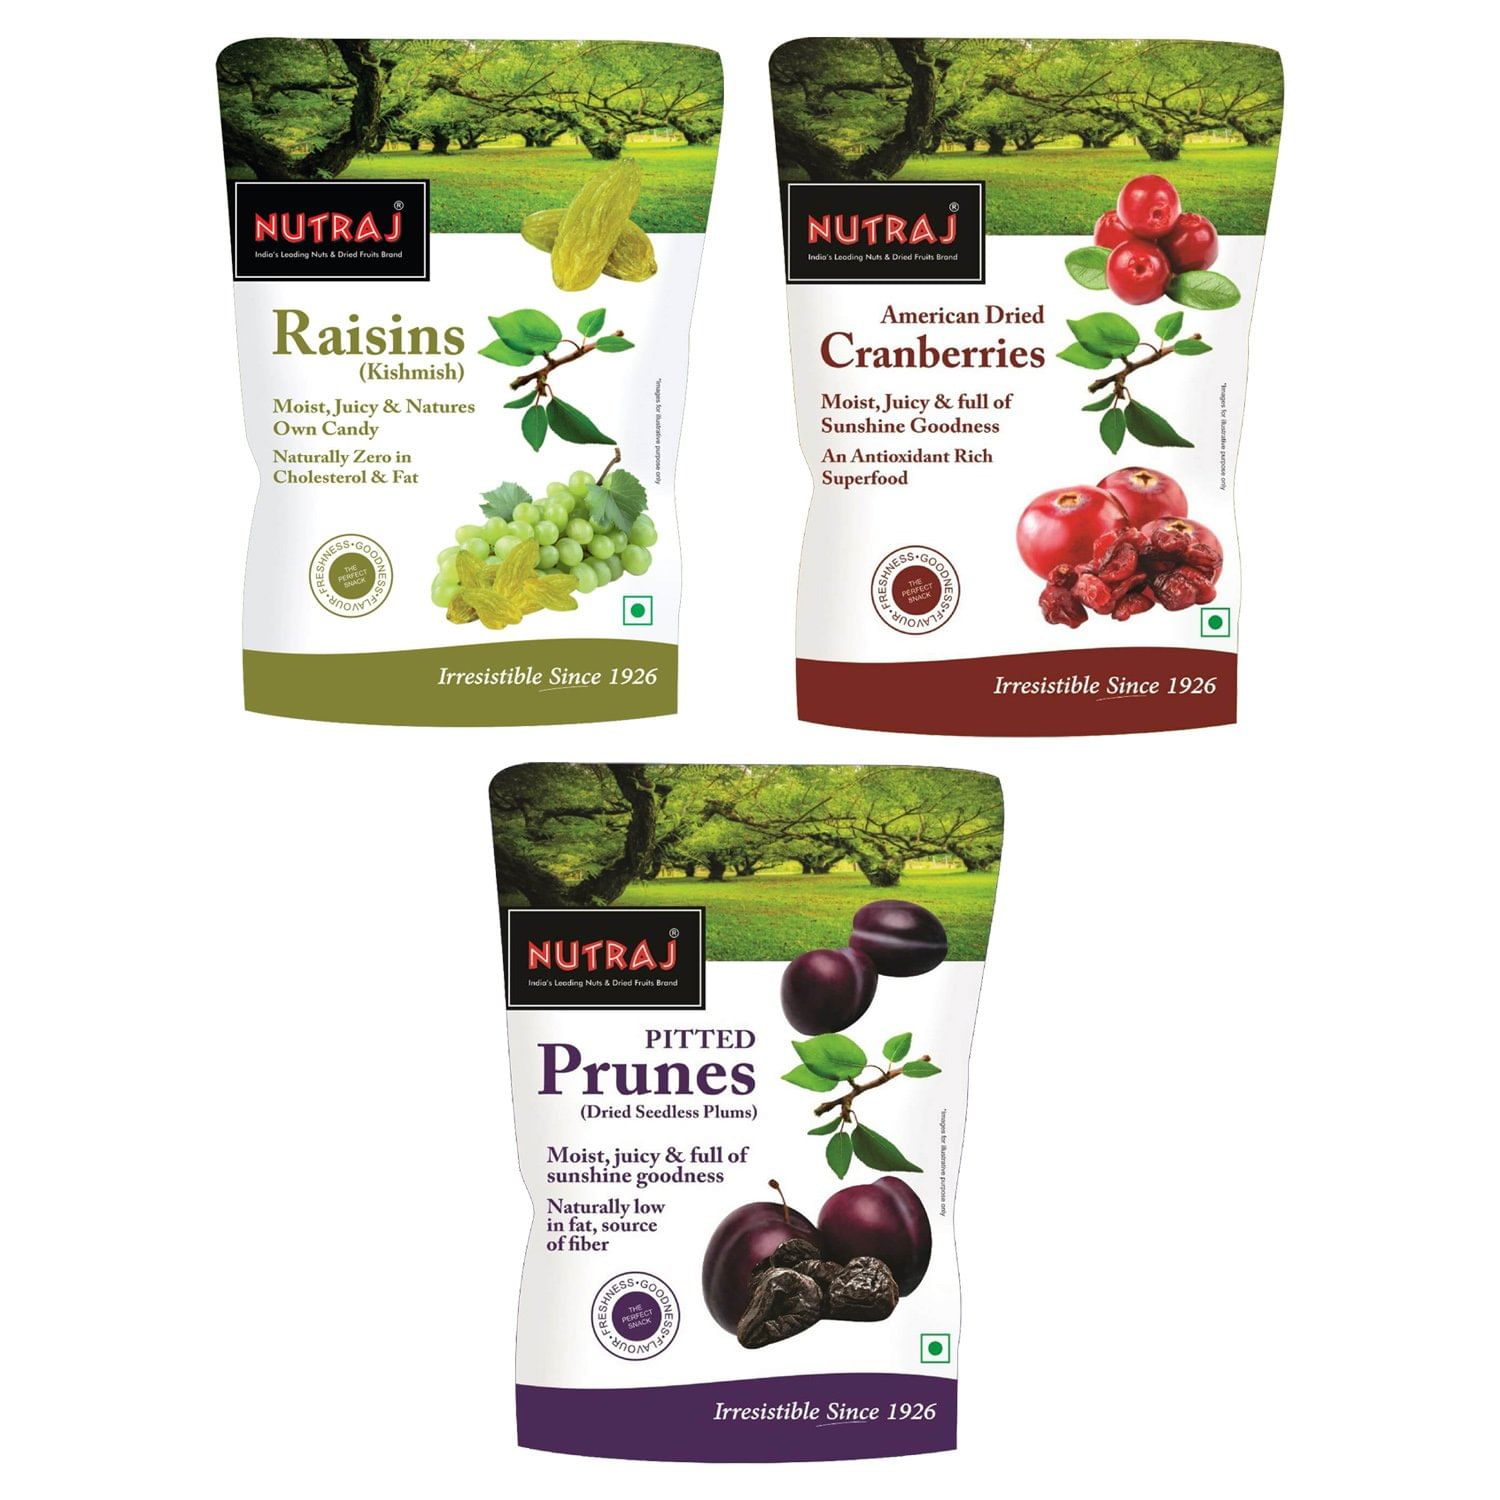 Nutraj Delicious Dried Fruits Combo Pack 630g - Dried Pitted Prunes 200g, Raisins 250g, Dried Cranberries 180g